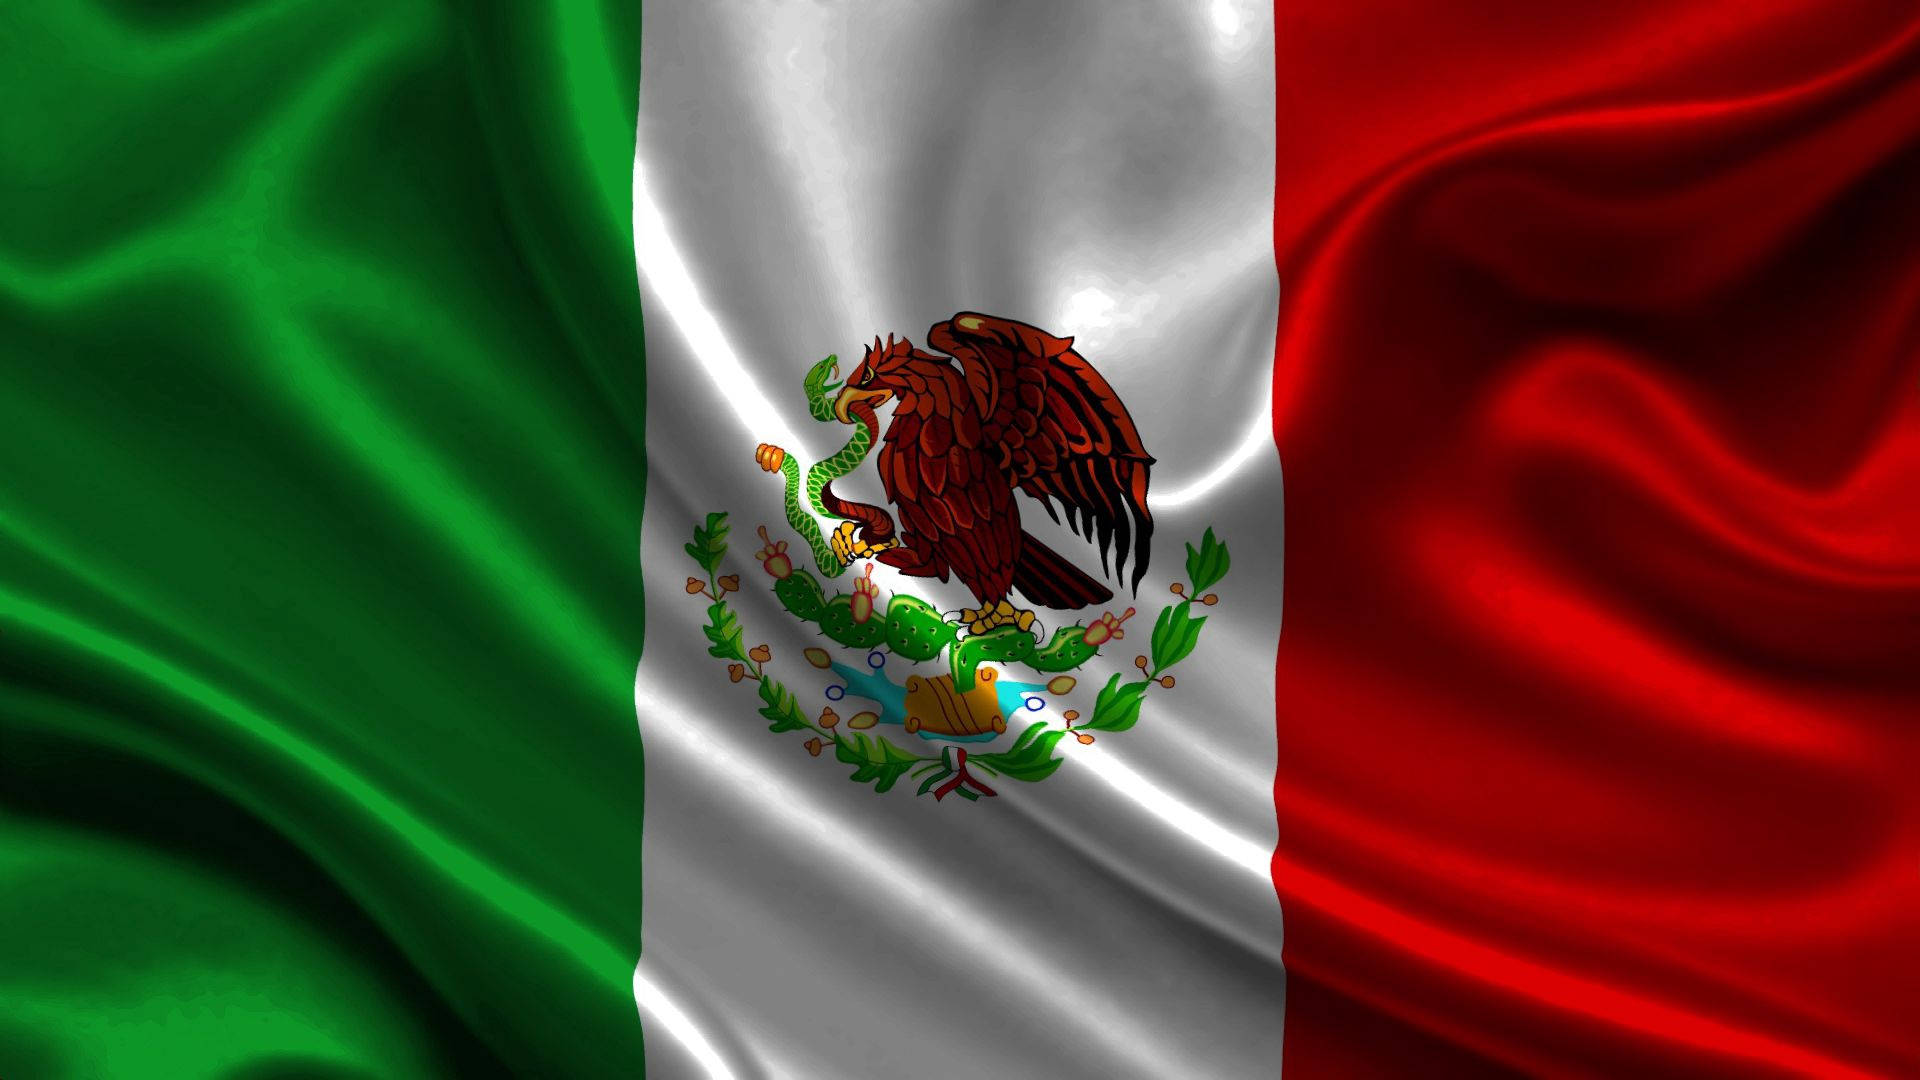 Mexico Wallpapers